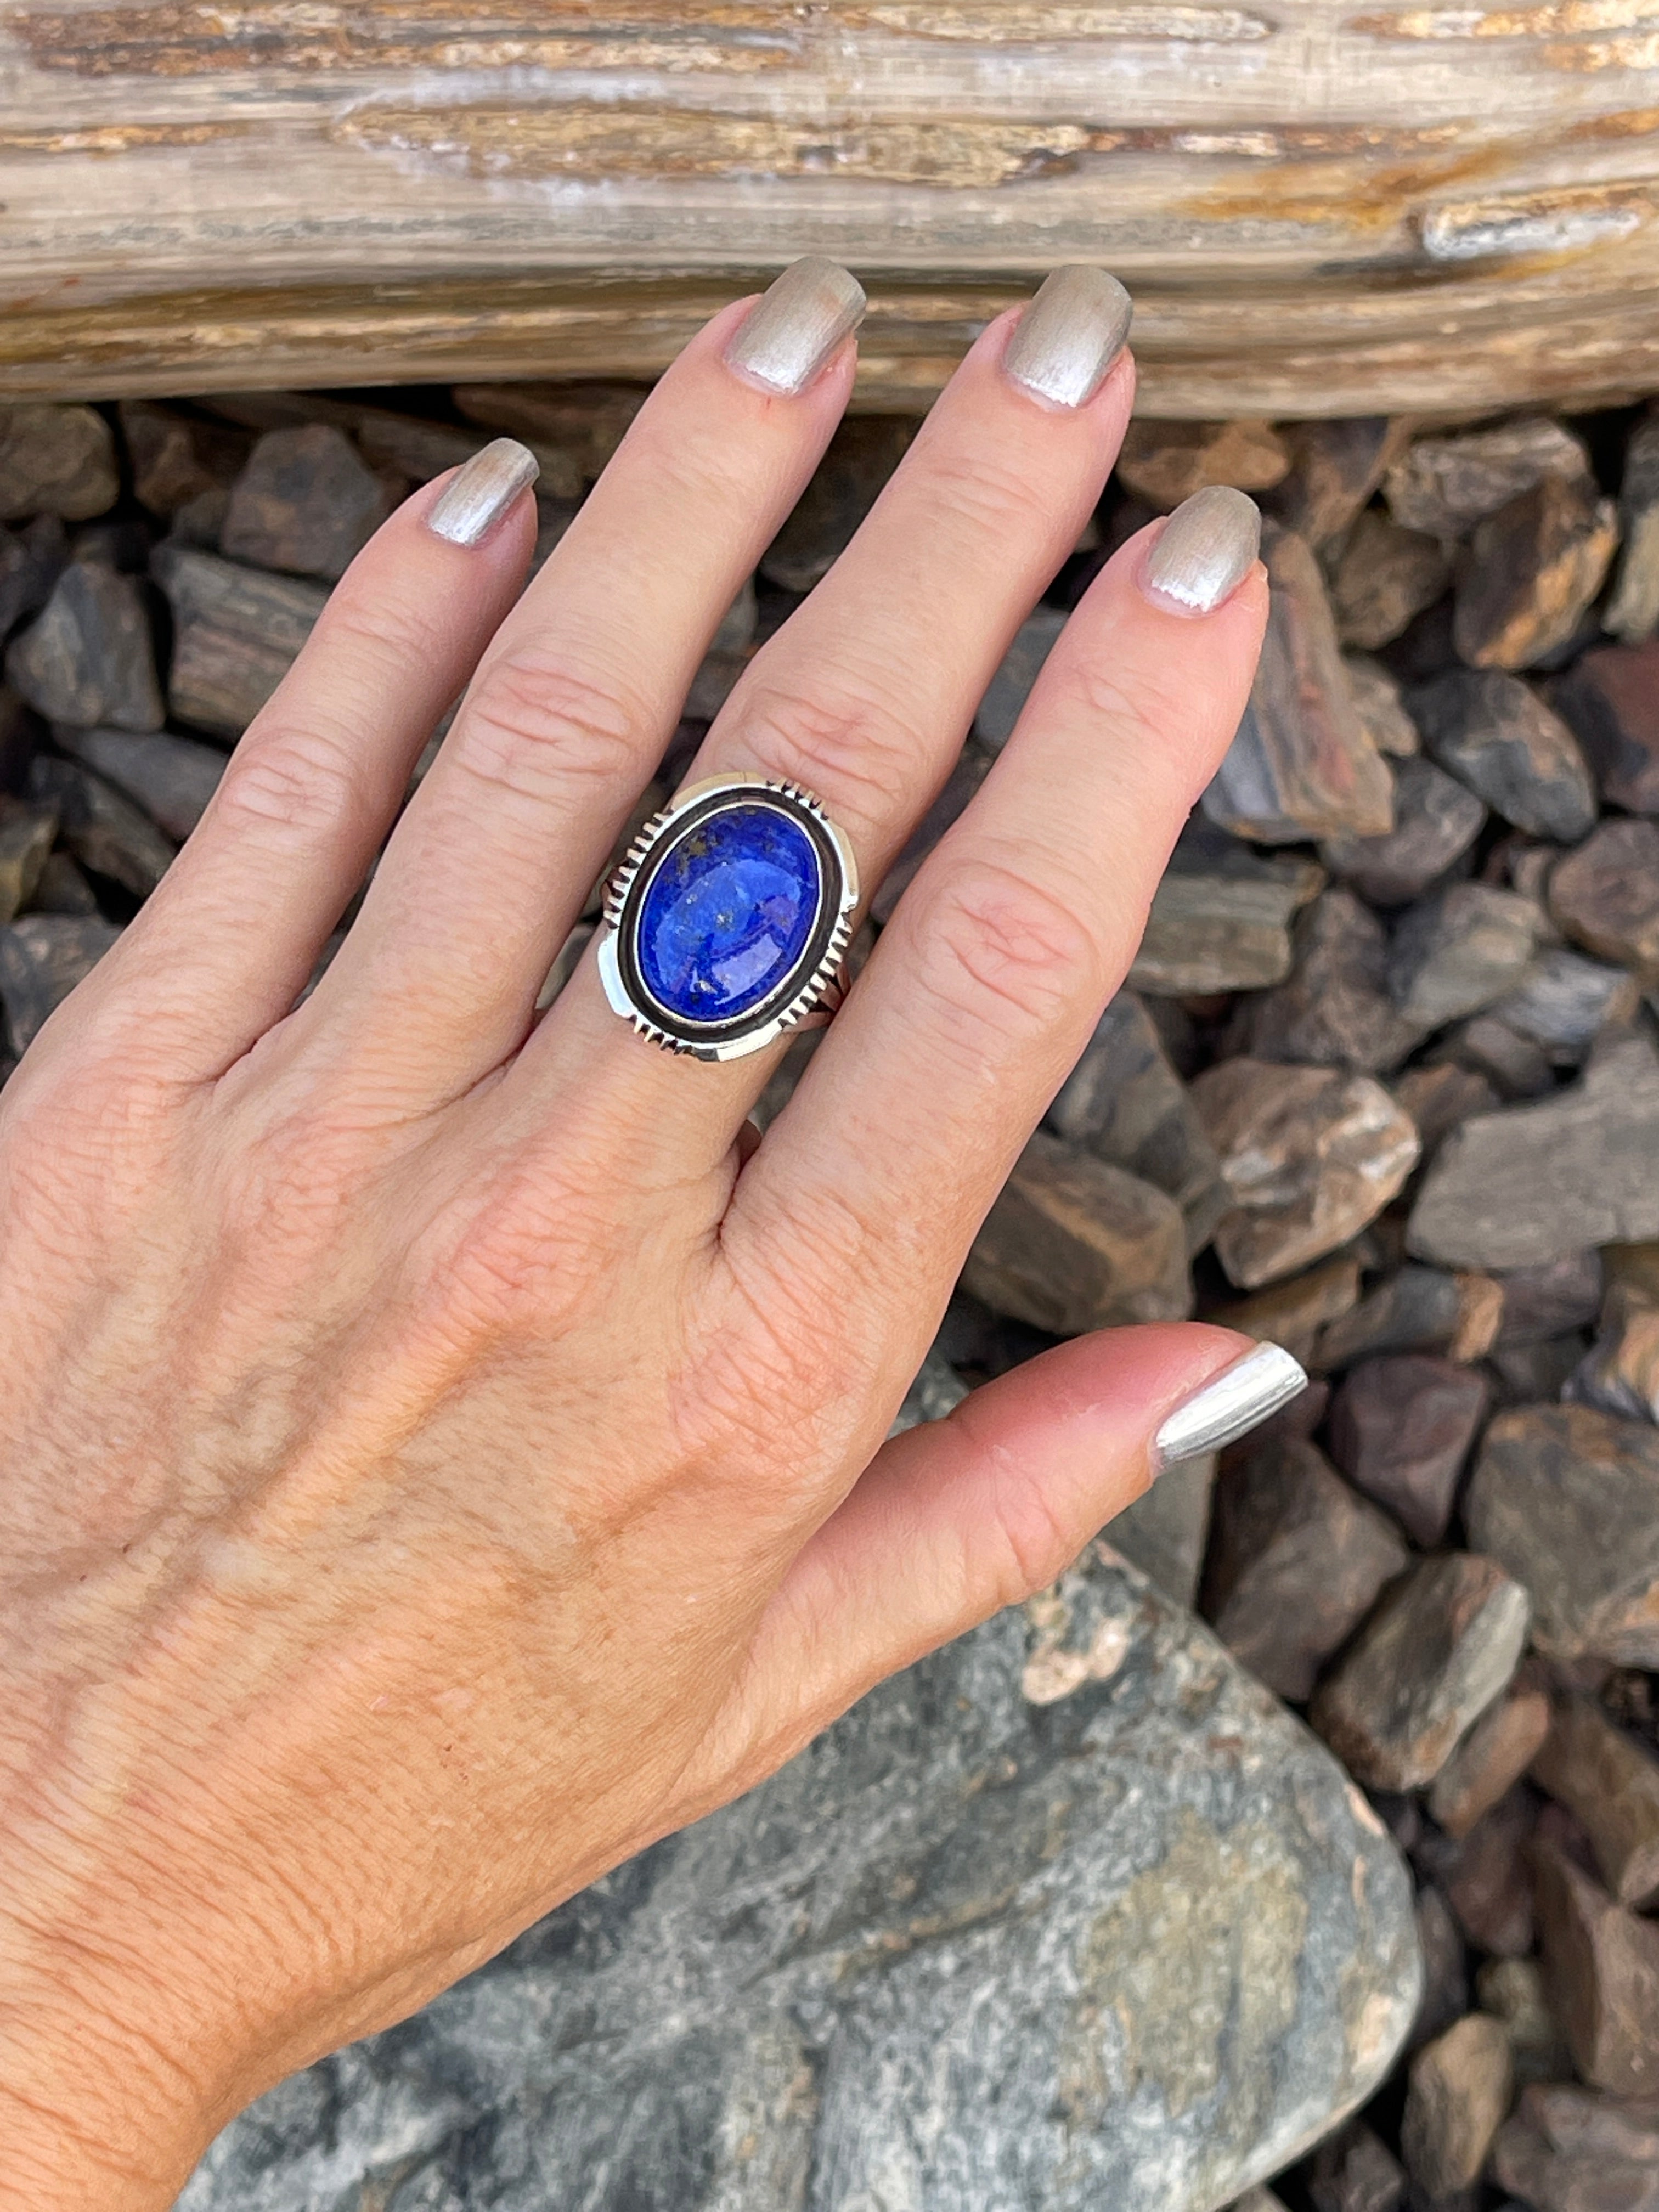 Handmade Solid Sterling Silver Lapis Ring with Shadow Box Trim - Size 9